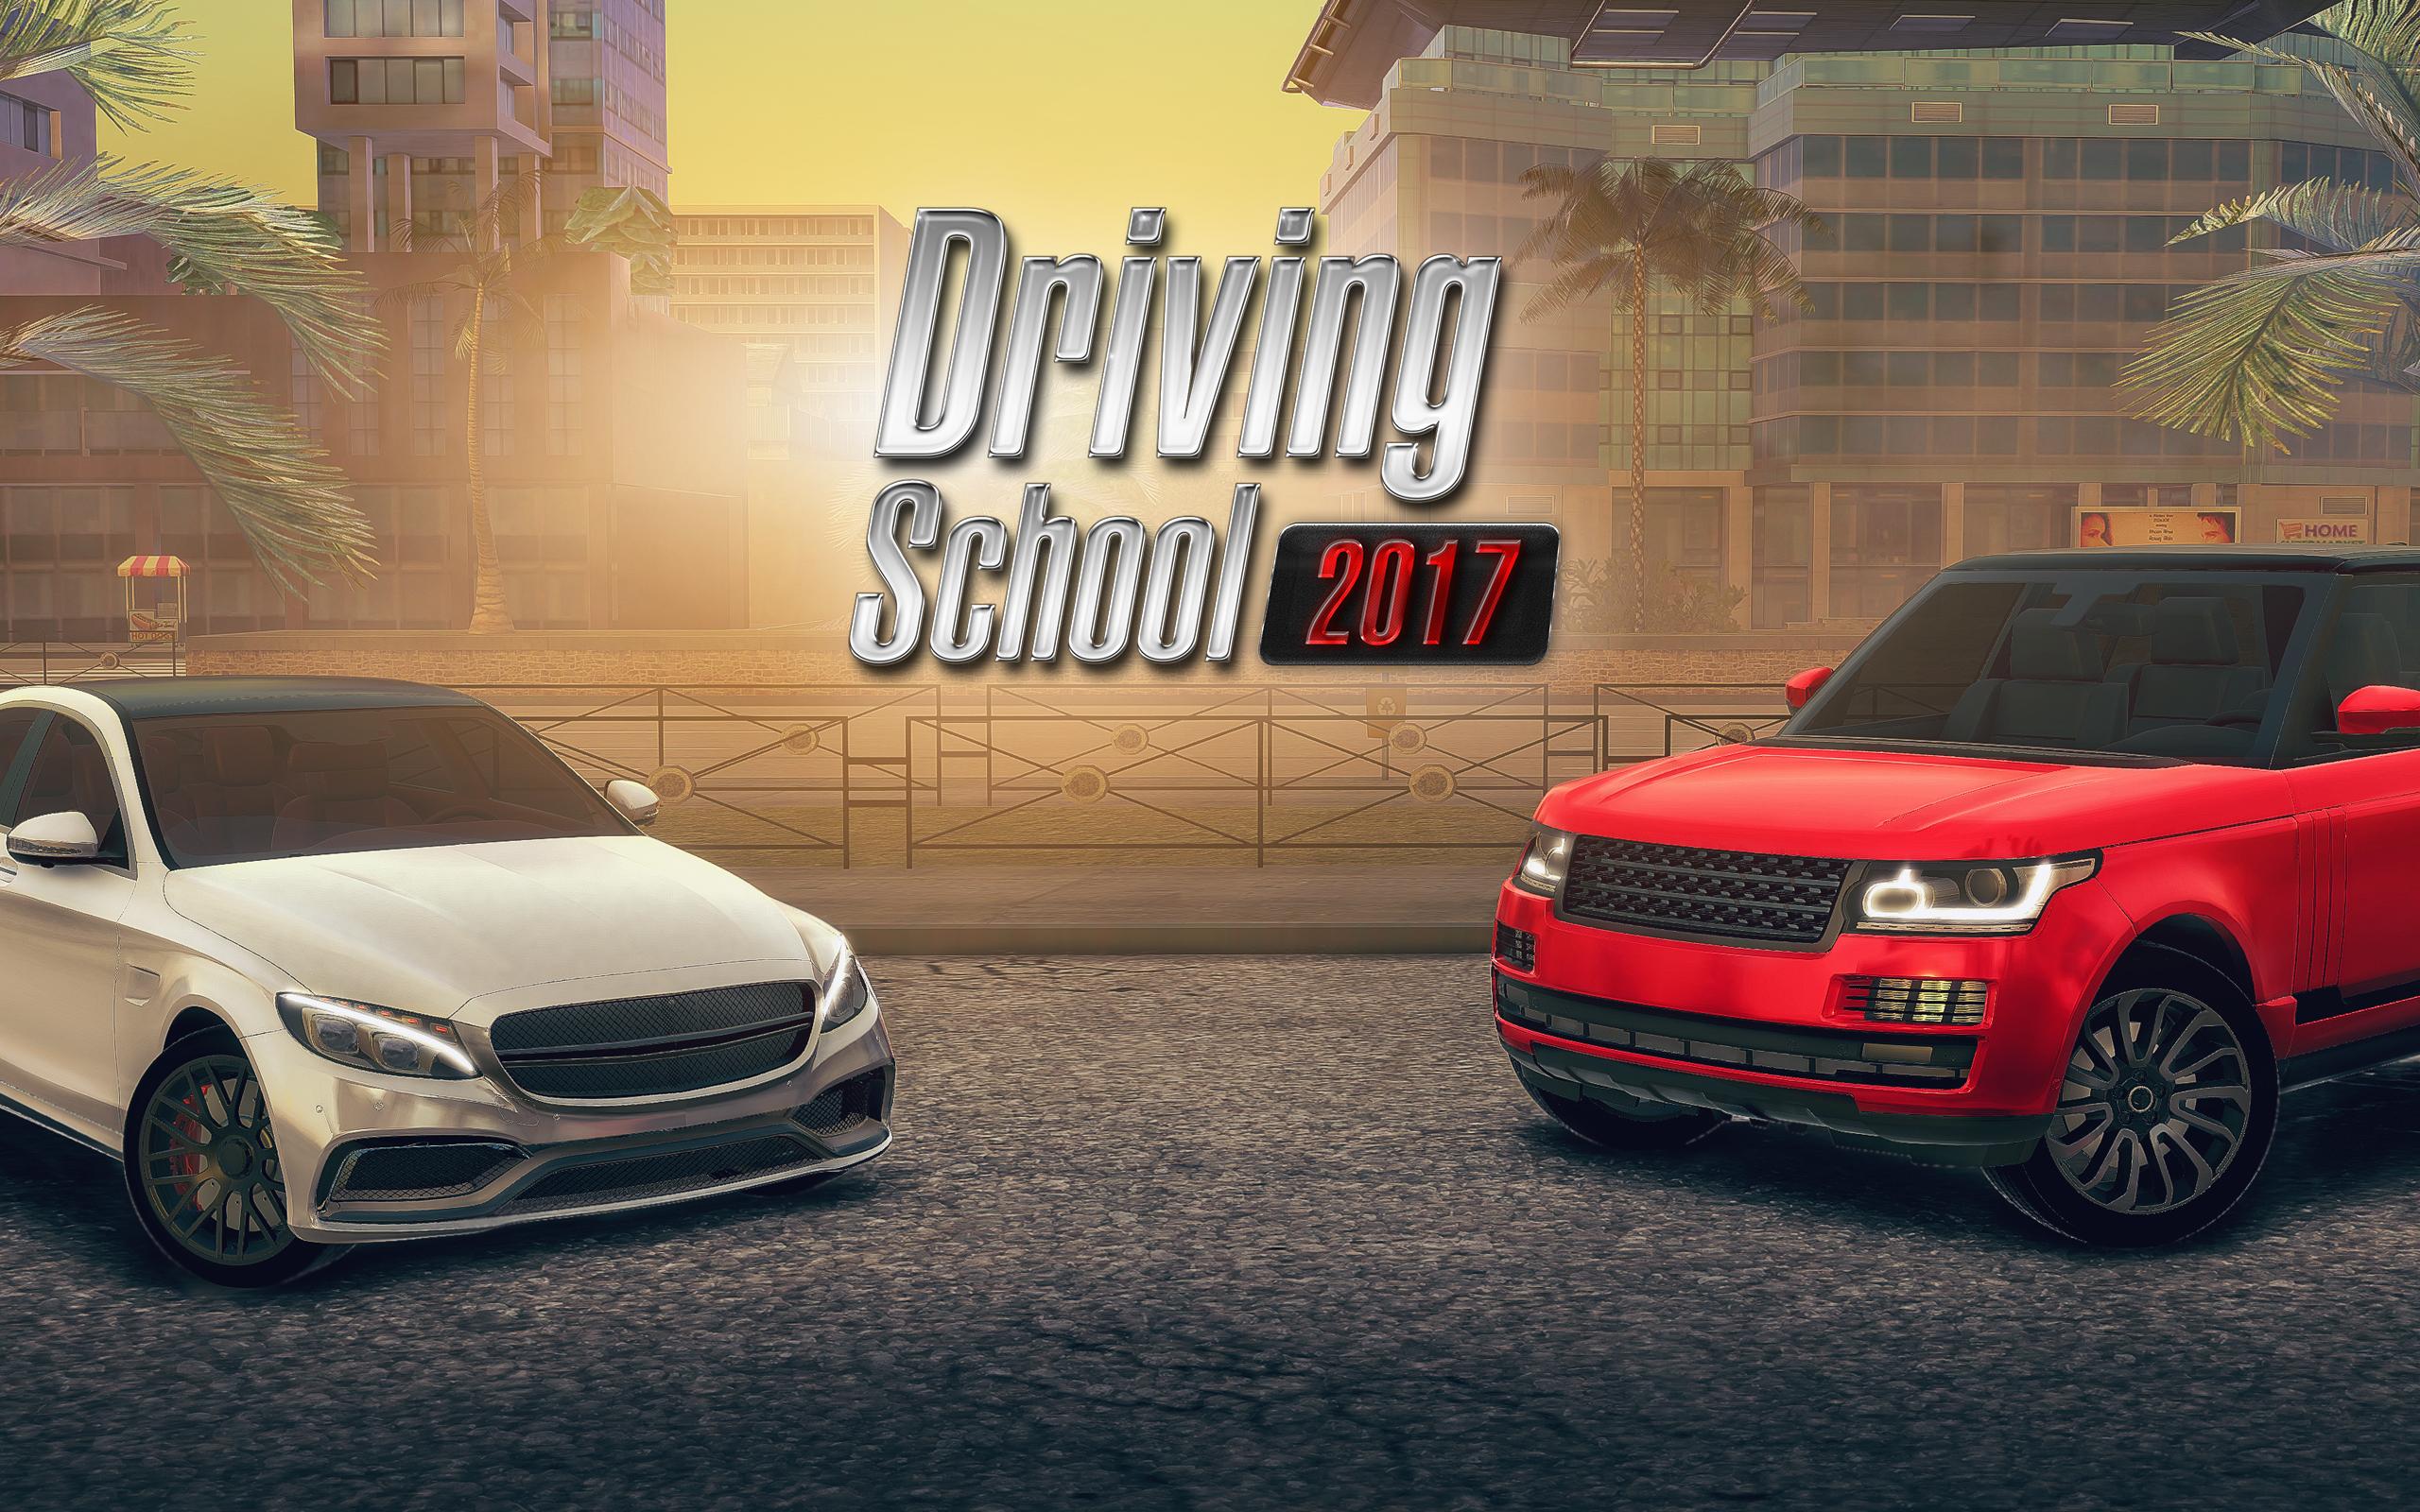 Download Car Driving Academy Simulator on PC with MEmu